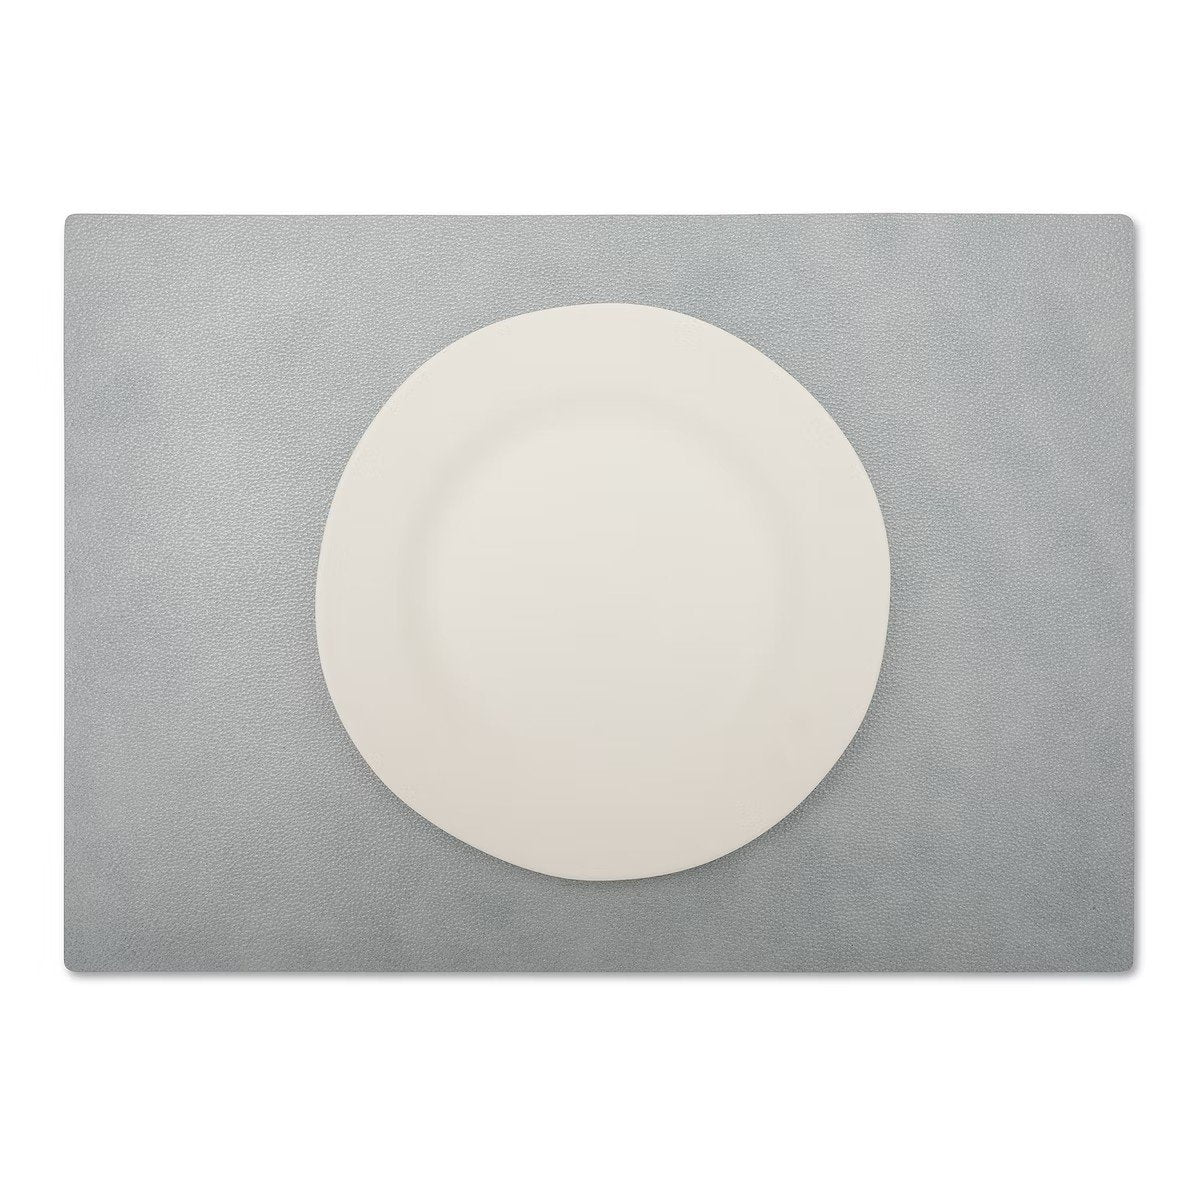 A large rectangular textured washable paper placemat in grey is shown under a white plate.